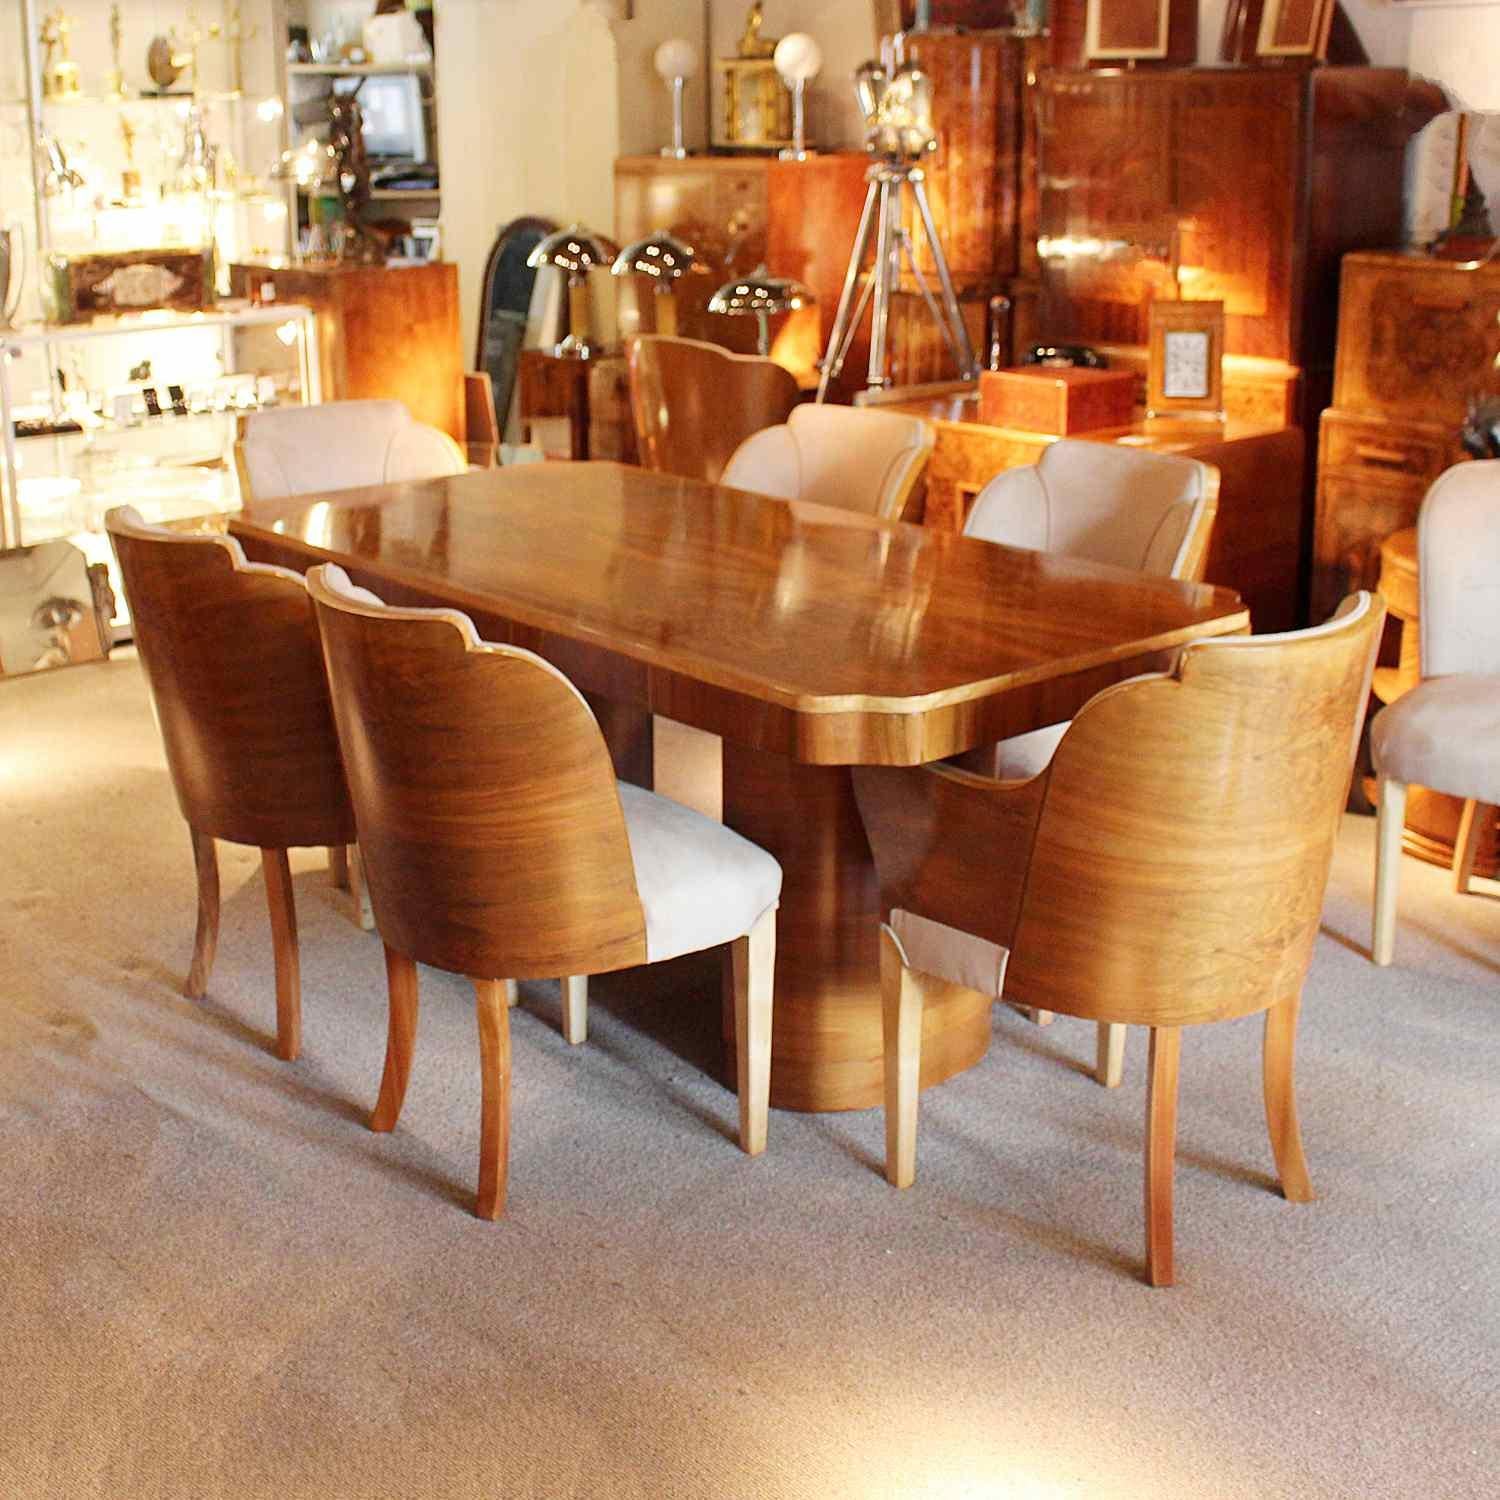 An Art Deco dining table with four chairs and two carvers by Harry & Lou Epstein. Figured walnut table with satinwood banding. Chairs wrapped in walnut with walnut and satinwood legs. Upholstered in oatmeal Alcantara suede